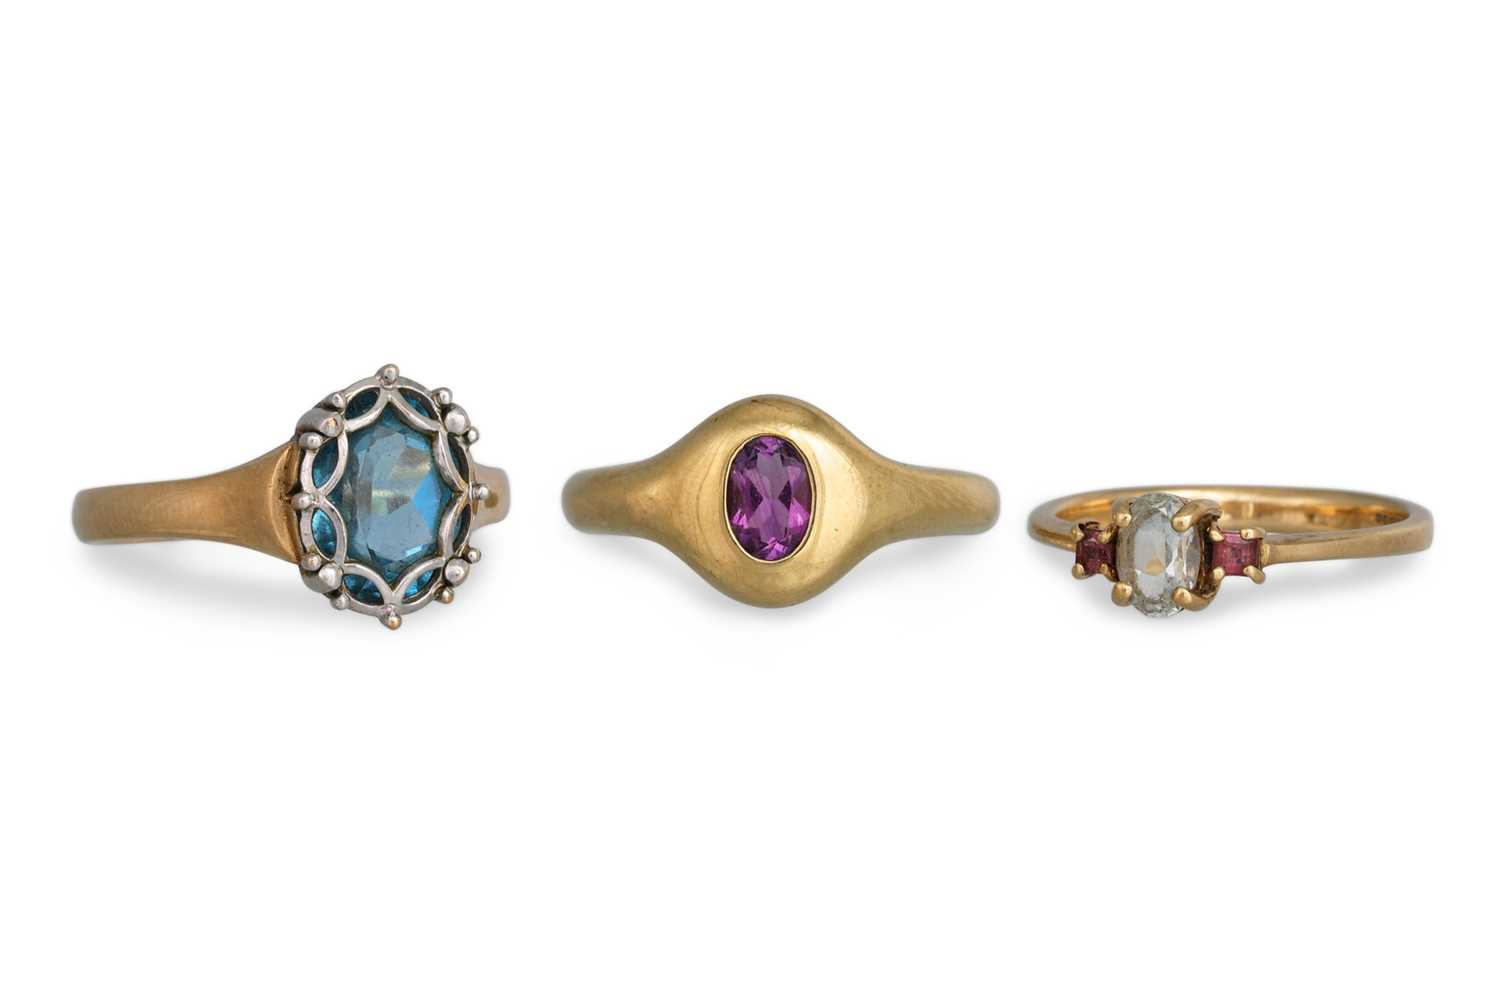 Lot 182 - THREE GEM SET RINGS, mounted in 9ct yellow gold